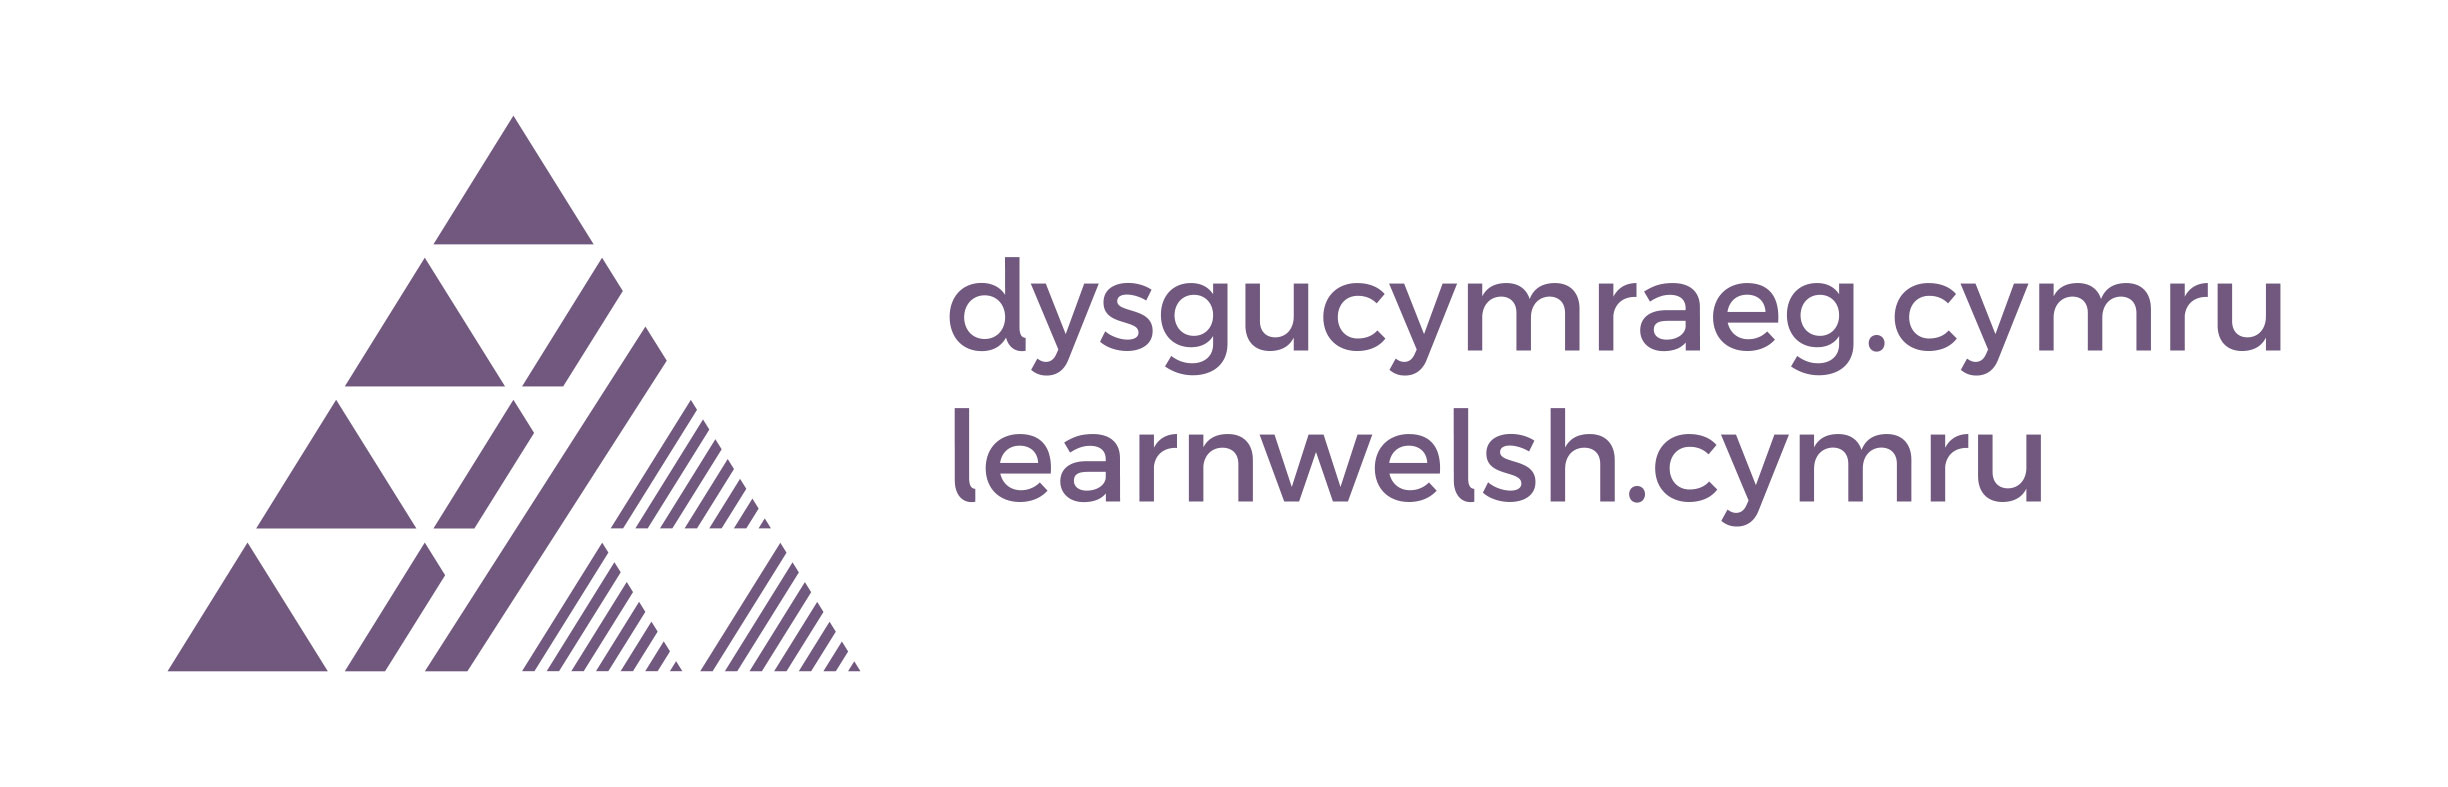 The National Centre for Learning Welsh